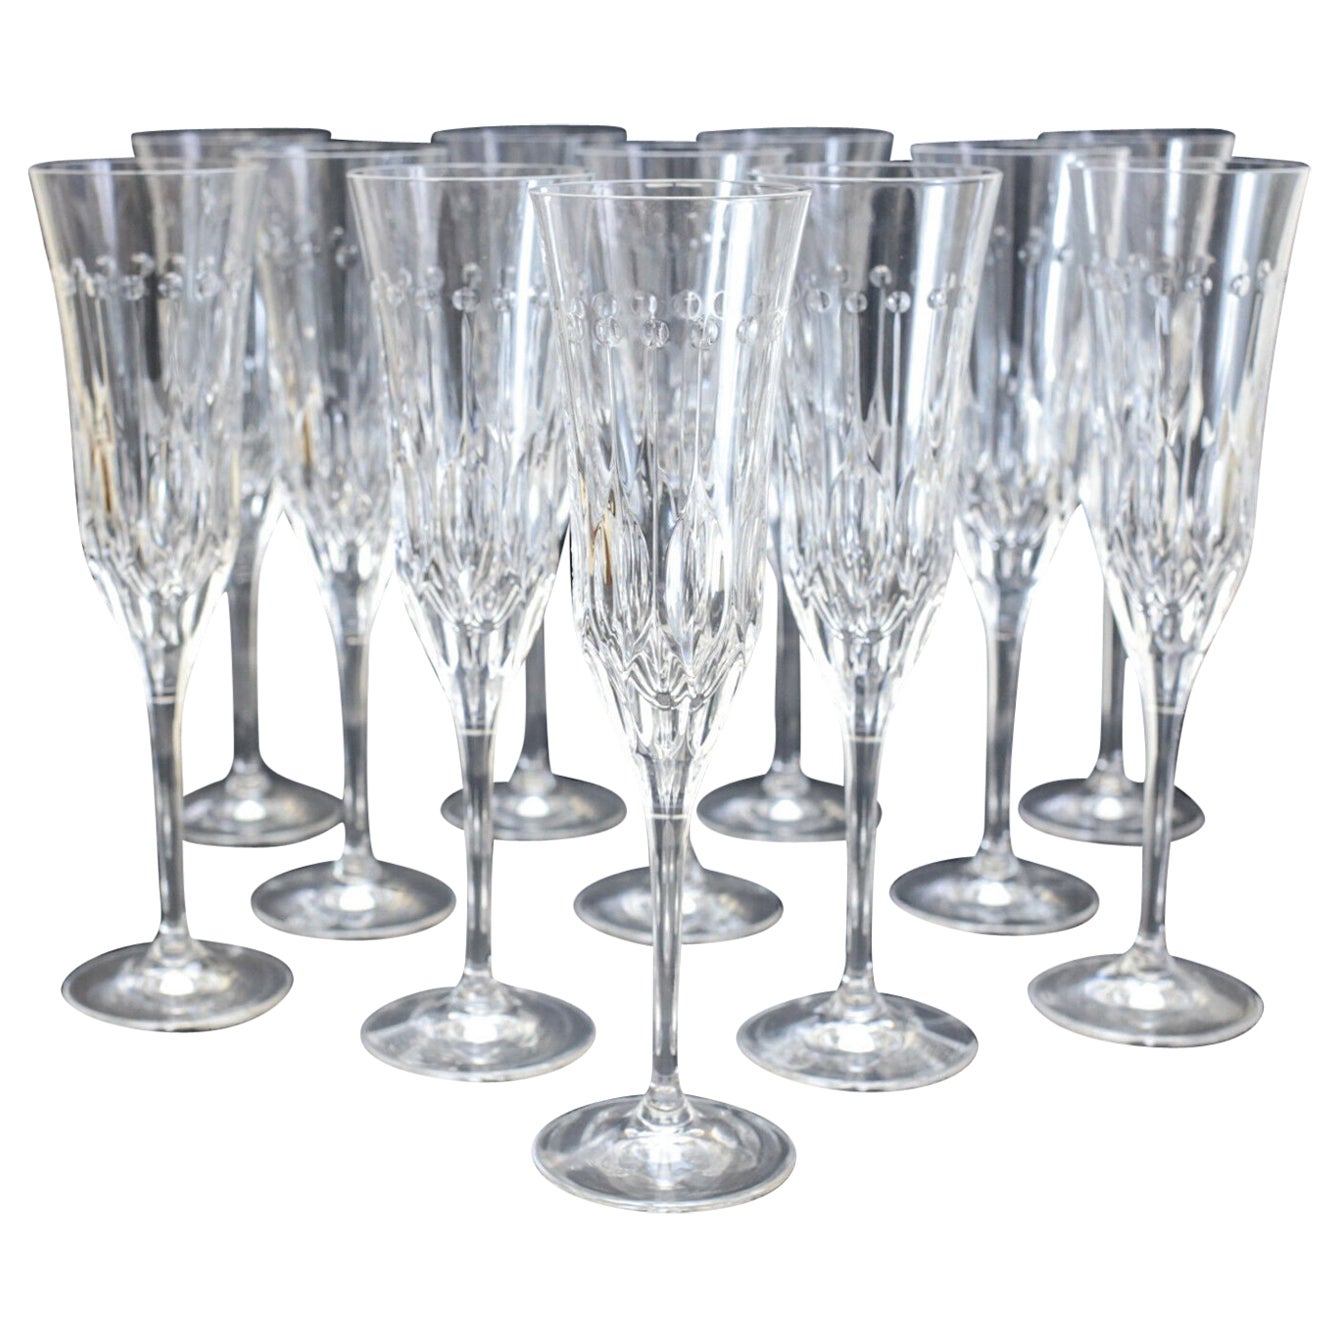 12 Varga Contemporary Cut Glass Clear Fluted Champagne Flutes in Renaissance